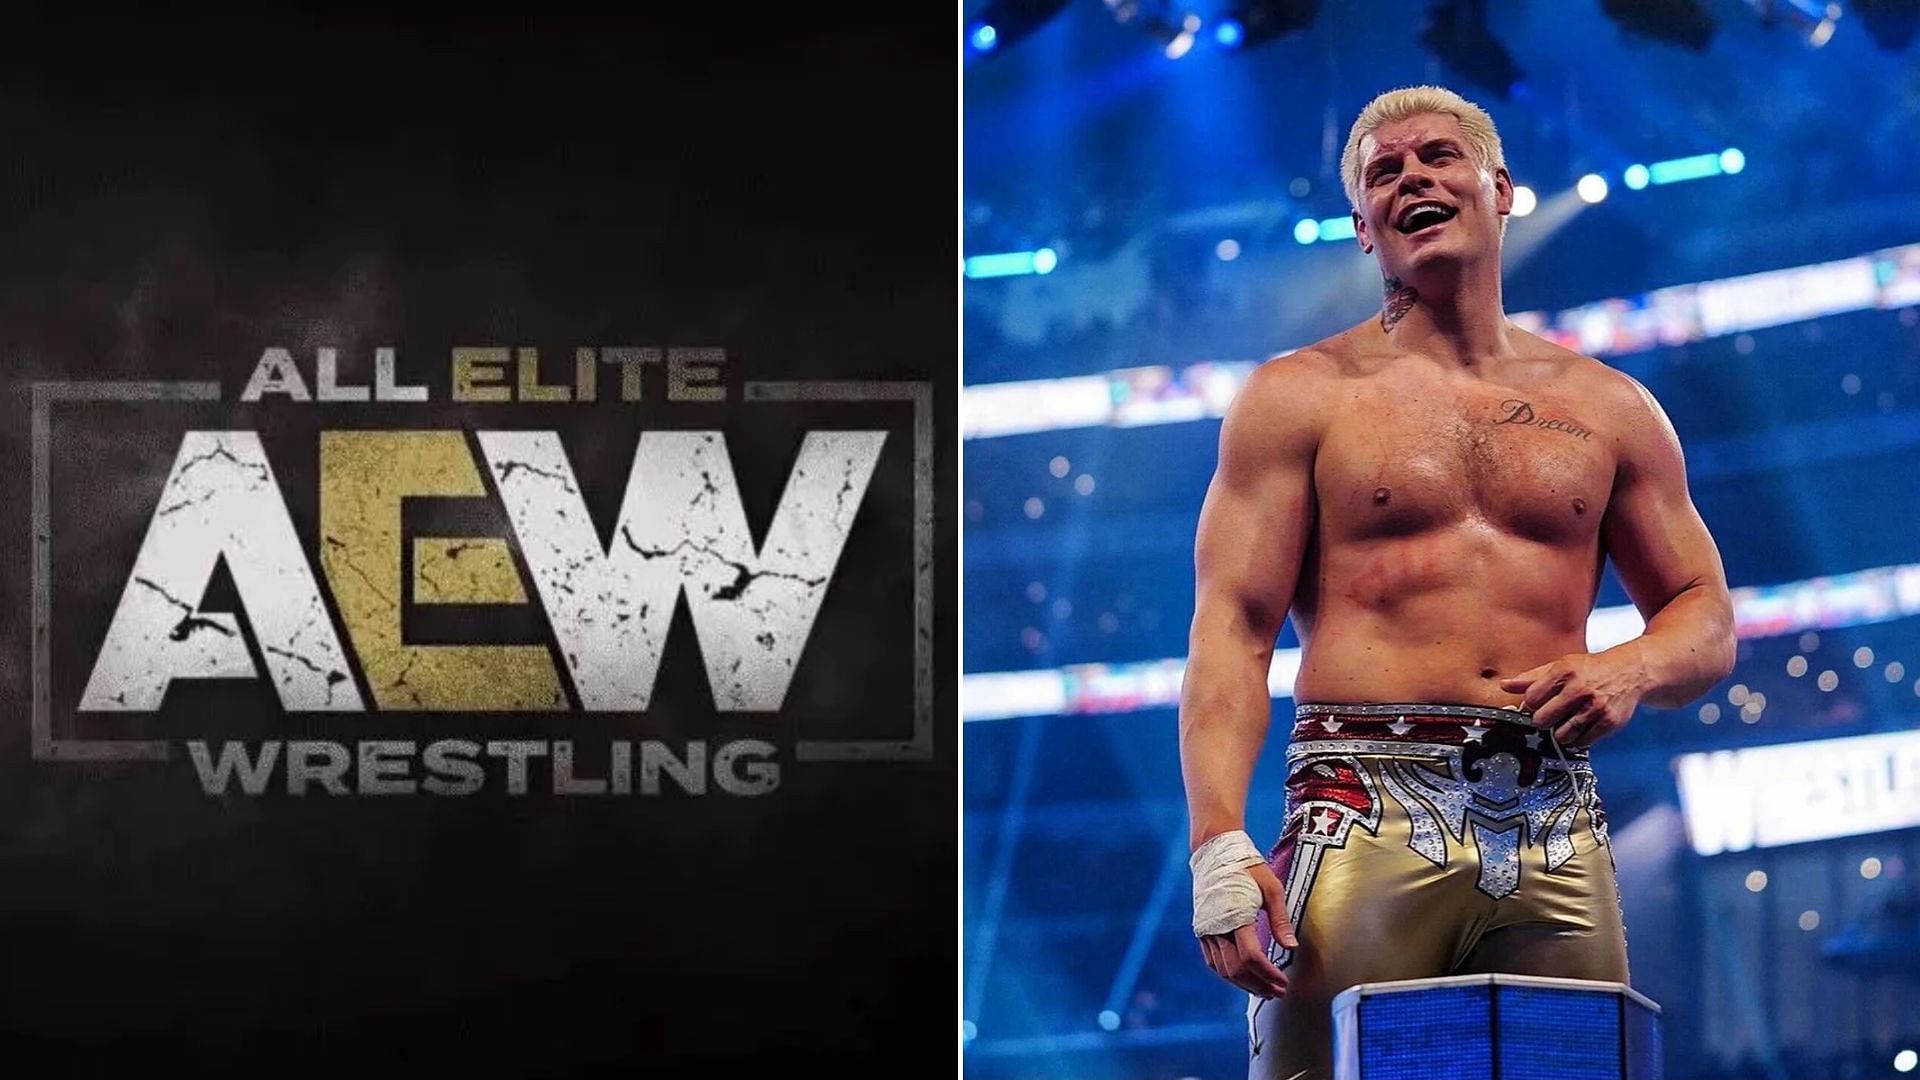 Wardlow opened up about his relationship with Cody Rhodes during a recent interview